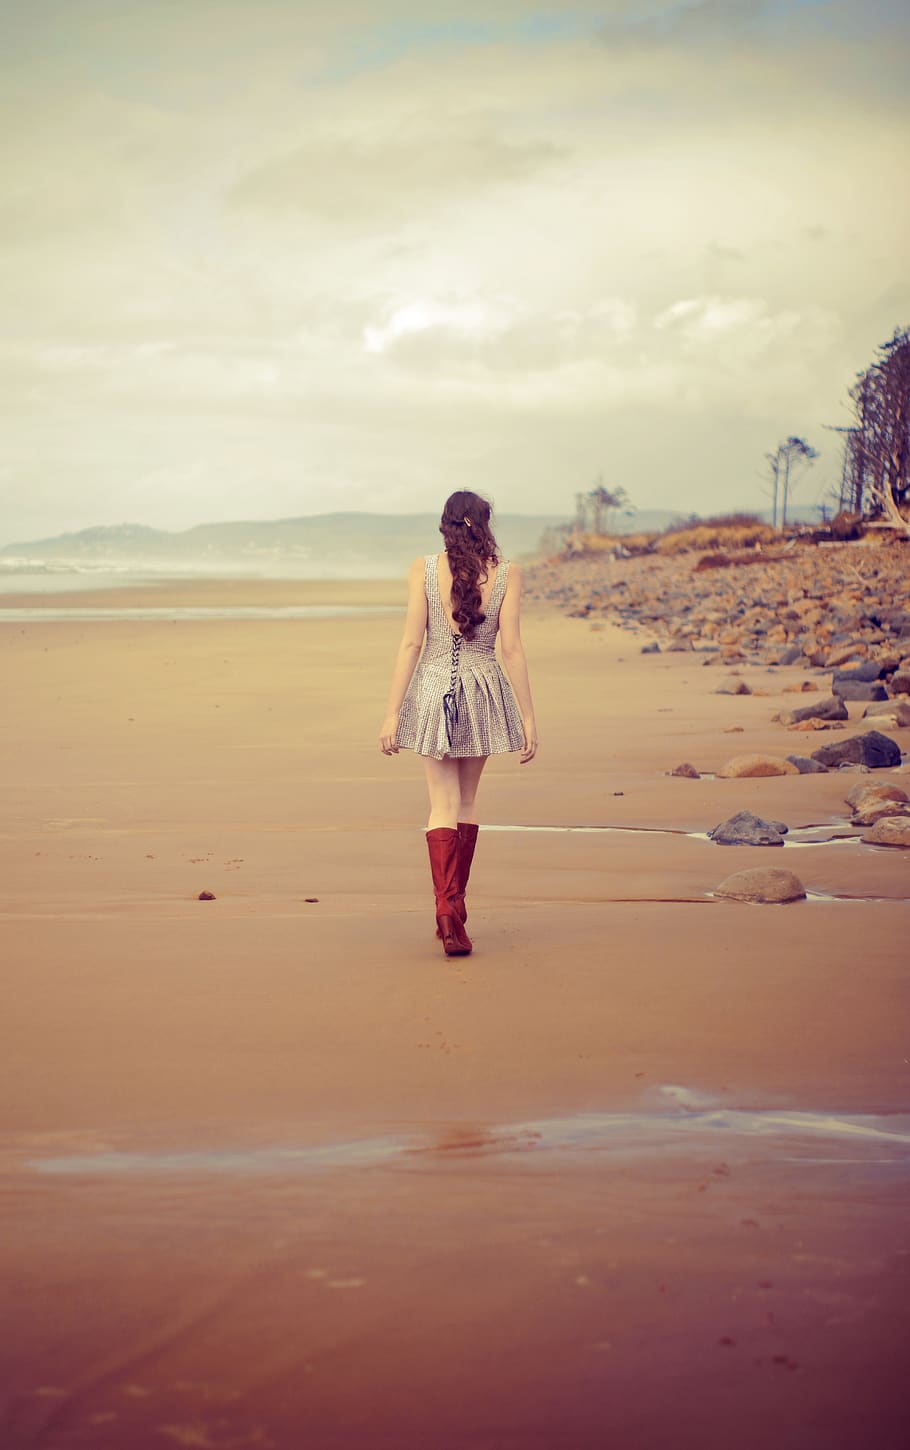 girl, alone, beach, walking, isolated, woman, young, nature, female, calm